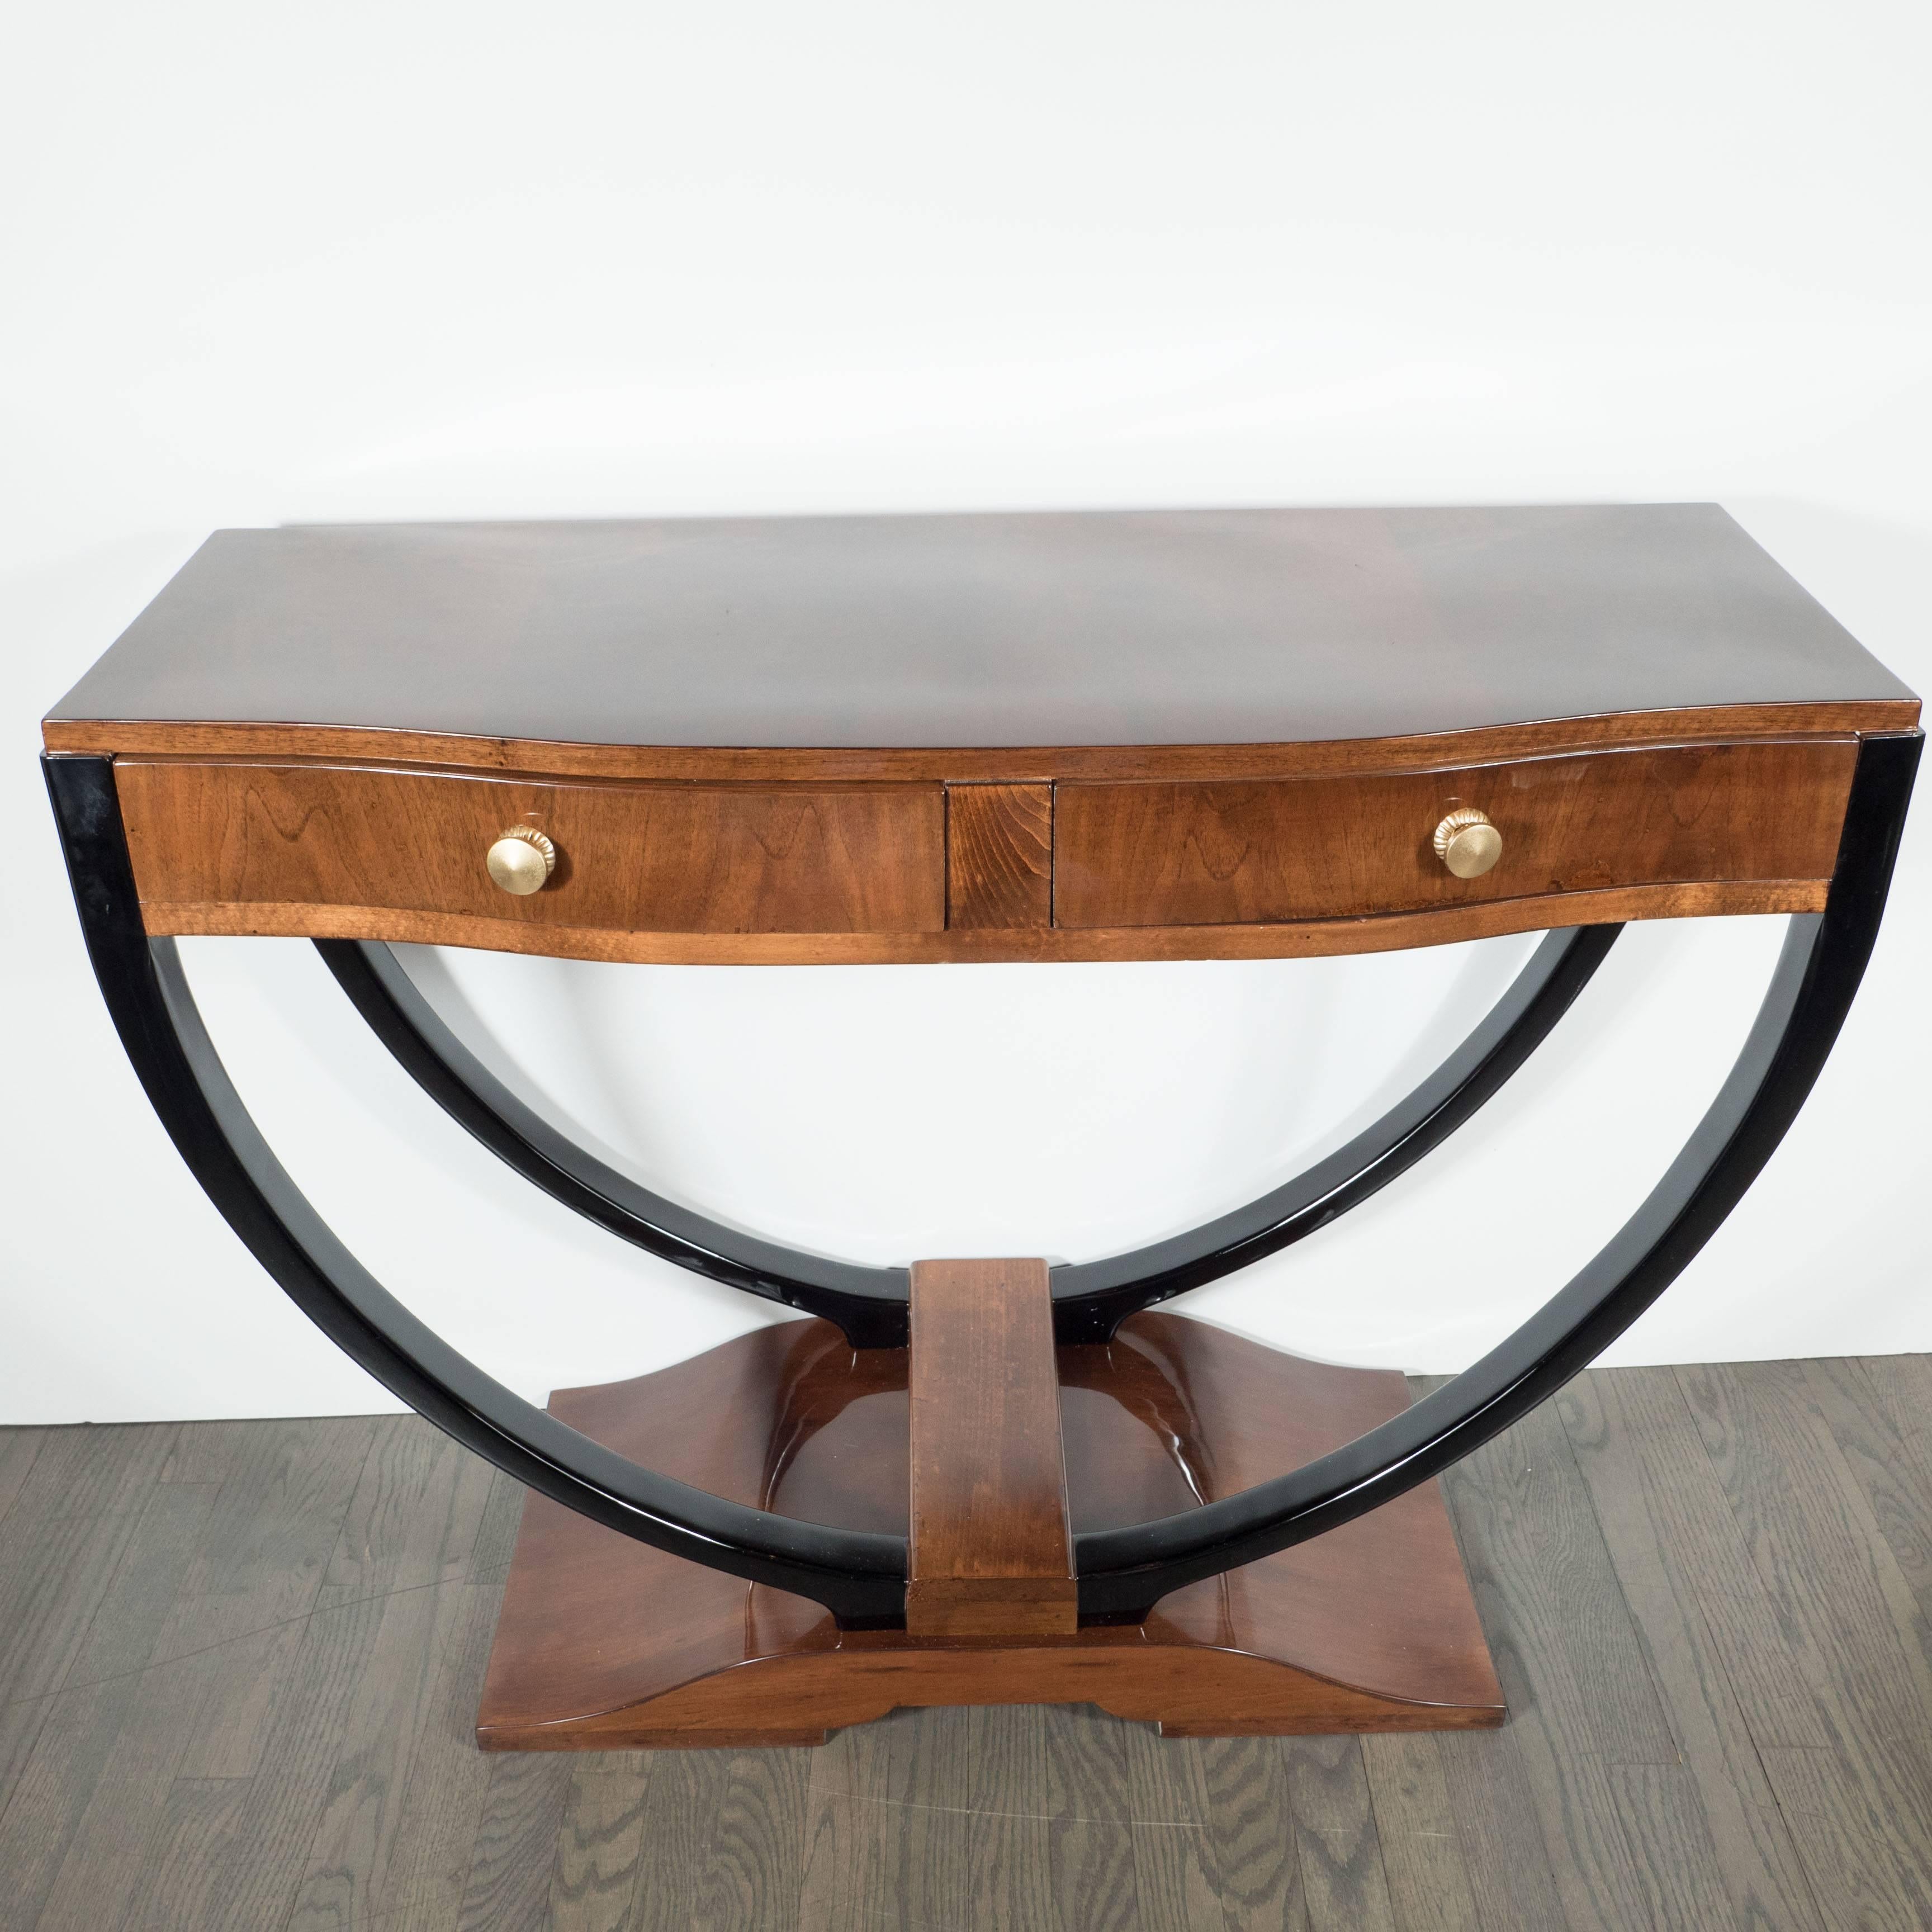 A French Art Deco console in lacquered bookmatched walnut with black lacquer accents. A curved base holds double U-form supports, on which rests a console with two pull-drawers, each adorned with a stylized round brass knob. The facade has a slight